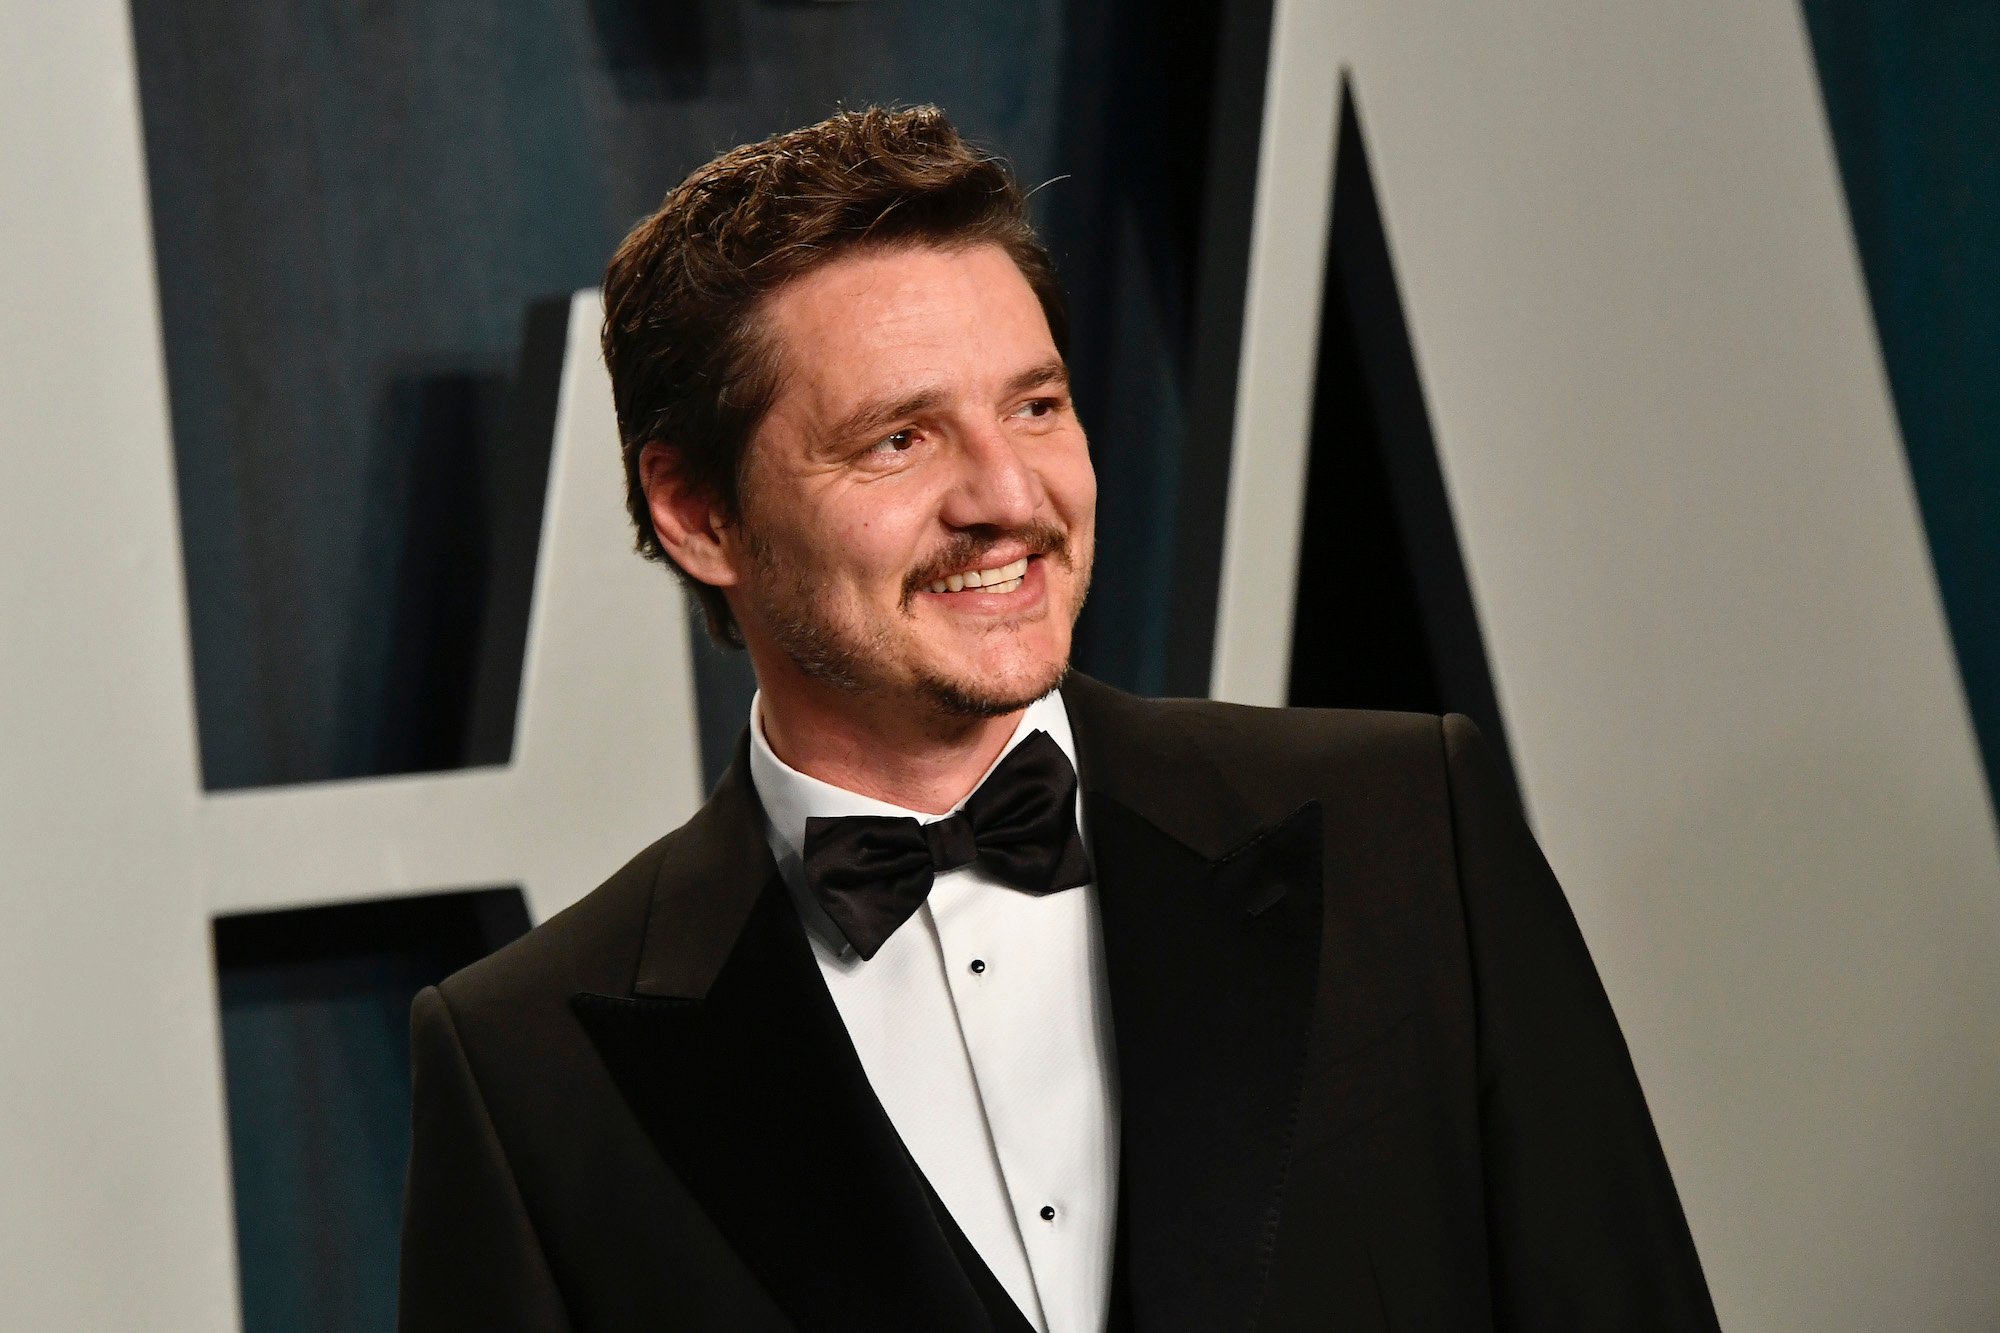 Pedro Pascal at the 2020 Vanity Fair Oscar Party at Wallis Annenberg Center for the Performing Arts on Feb. 09, 2020 